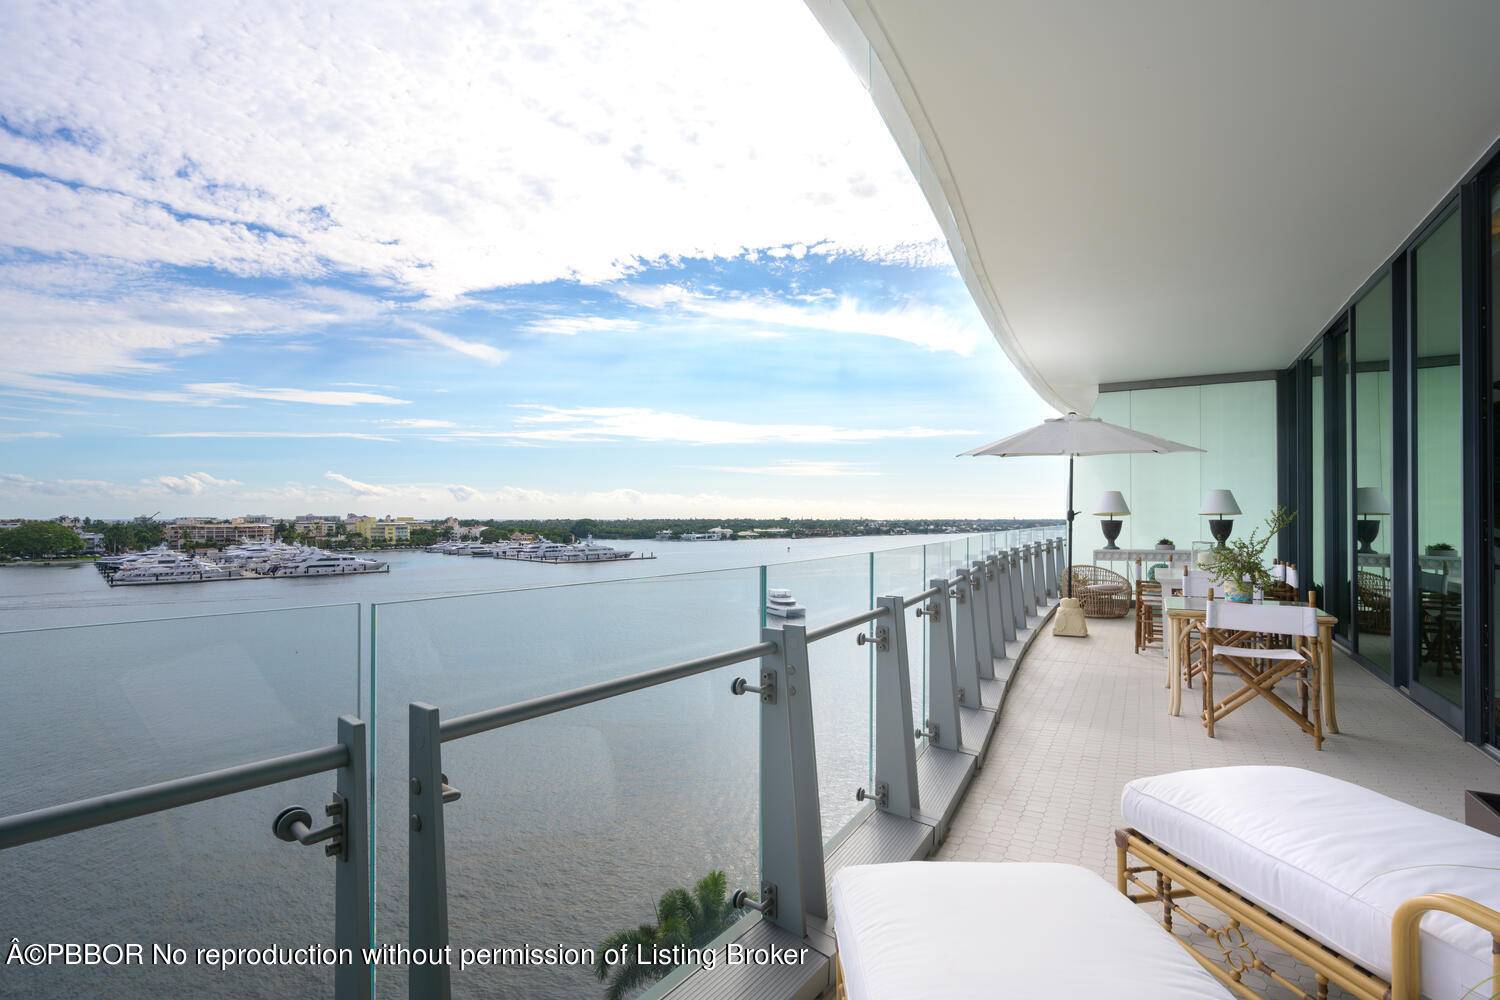 Picture yourself enjoying morning sunrises and evening cocktails with a magnificent and unobstructed view of Palm Beach and the Intracoastal, framed by the elegant yachts berthed at the Palm Beach ...